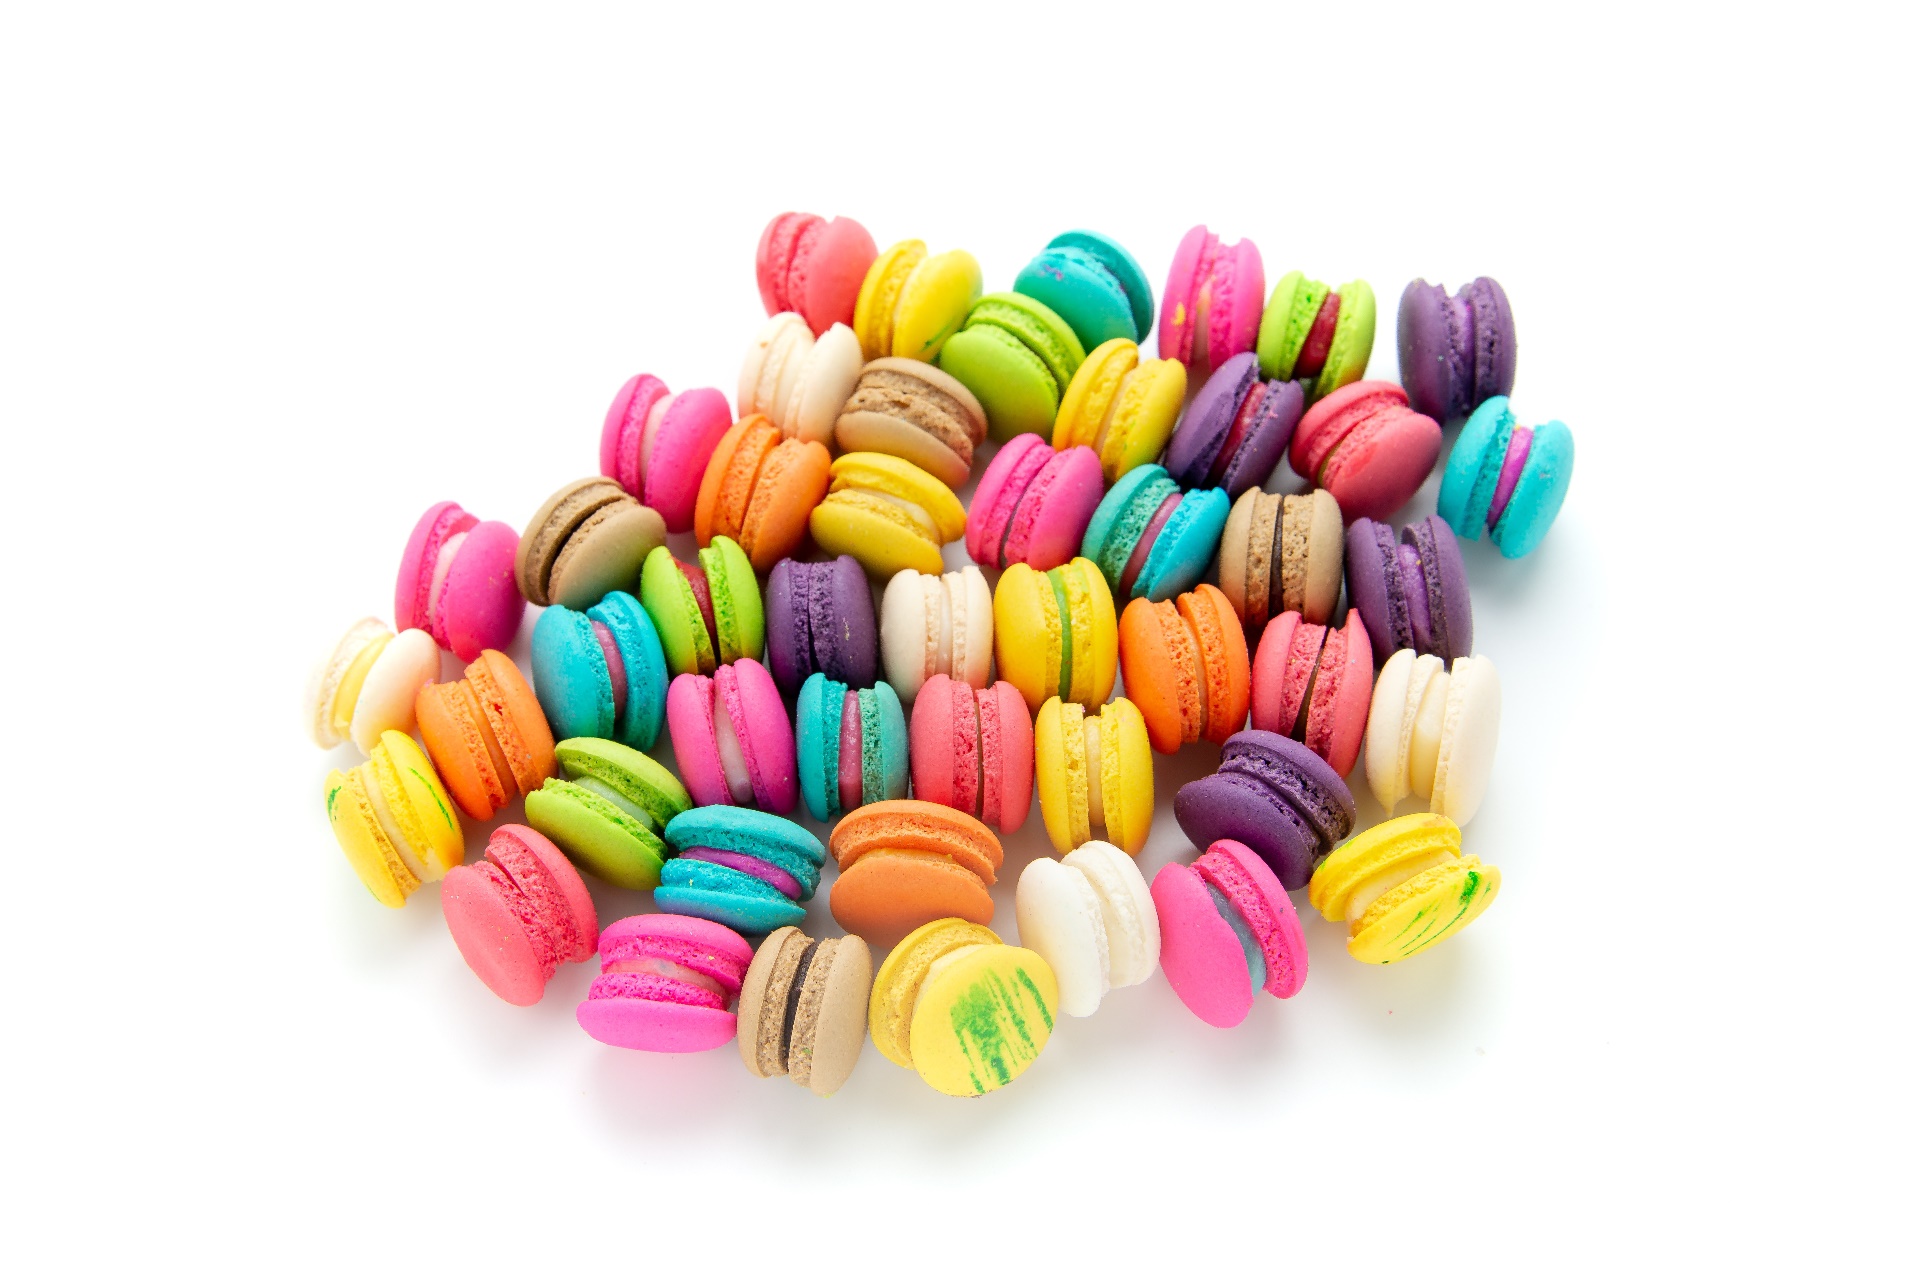 White Background Food Sweets Colorful Macarons Cookies Macaroons 1920x1282